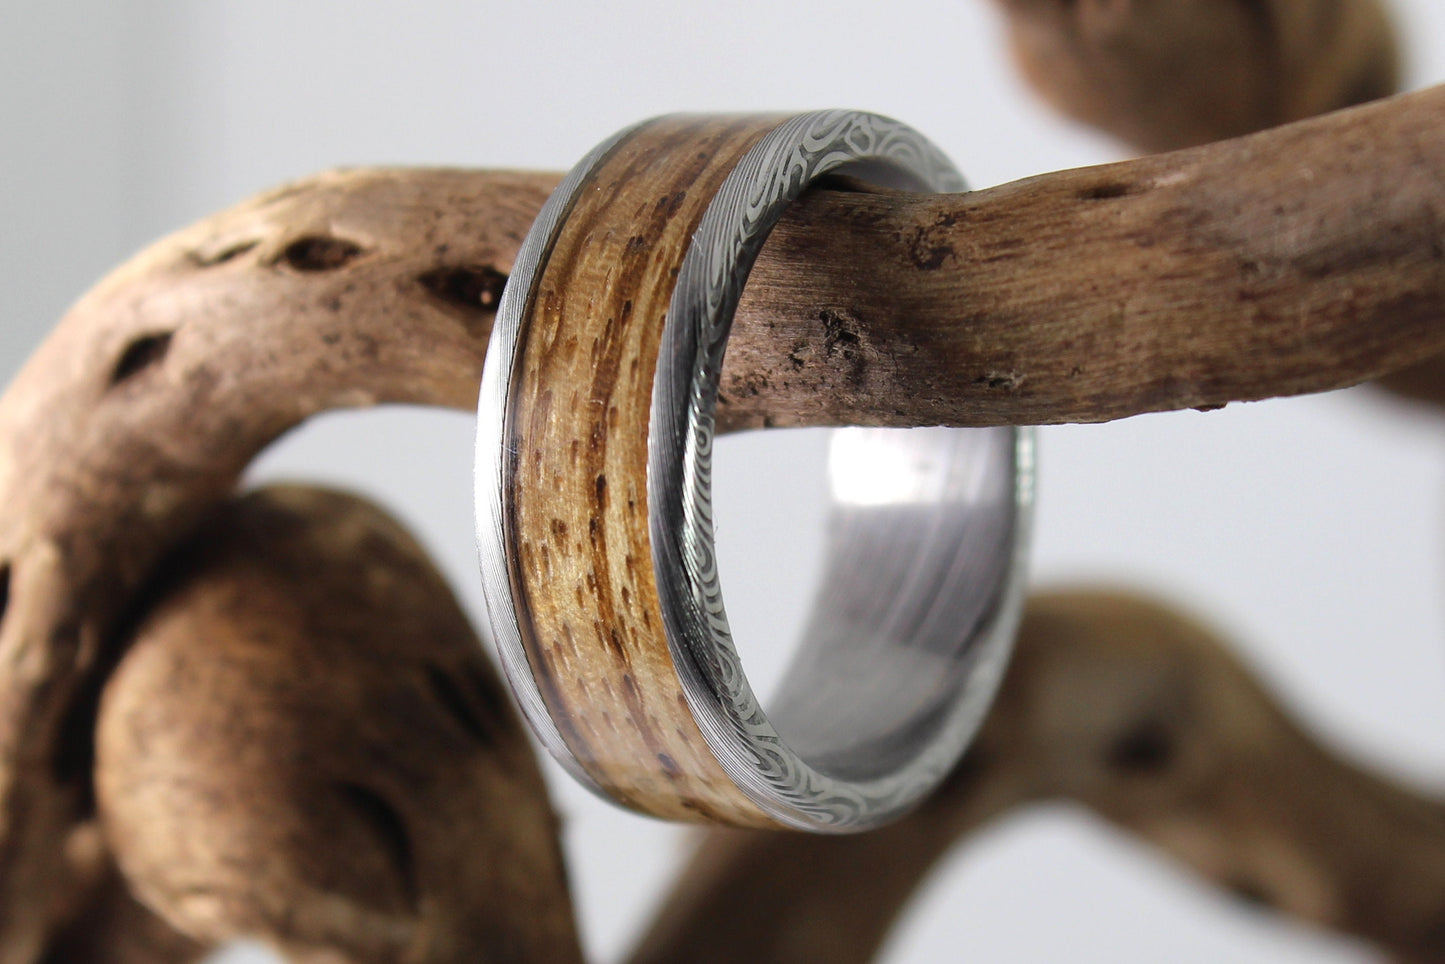 Damascus Steel Ring With Zebrano Wood Inlay